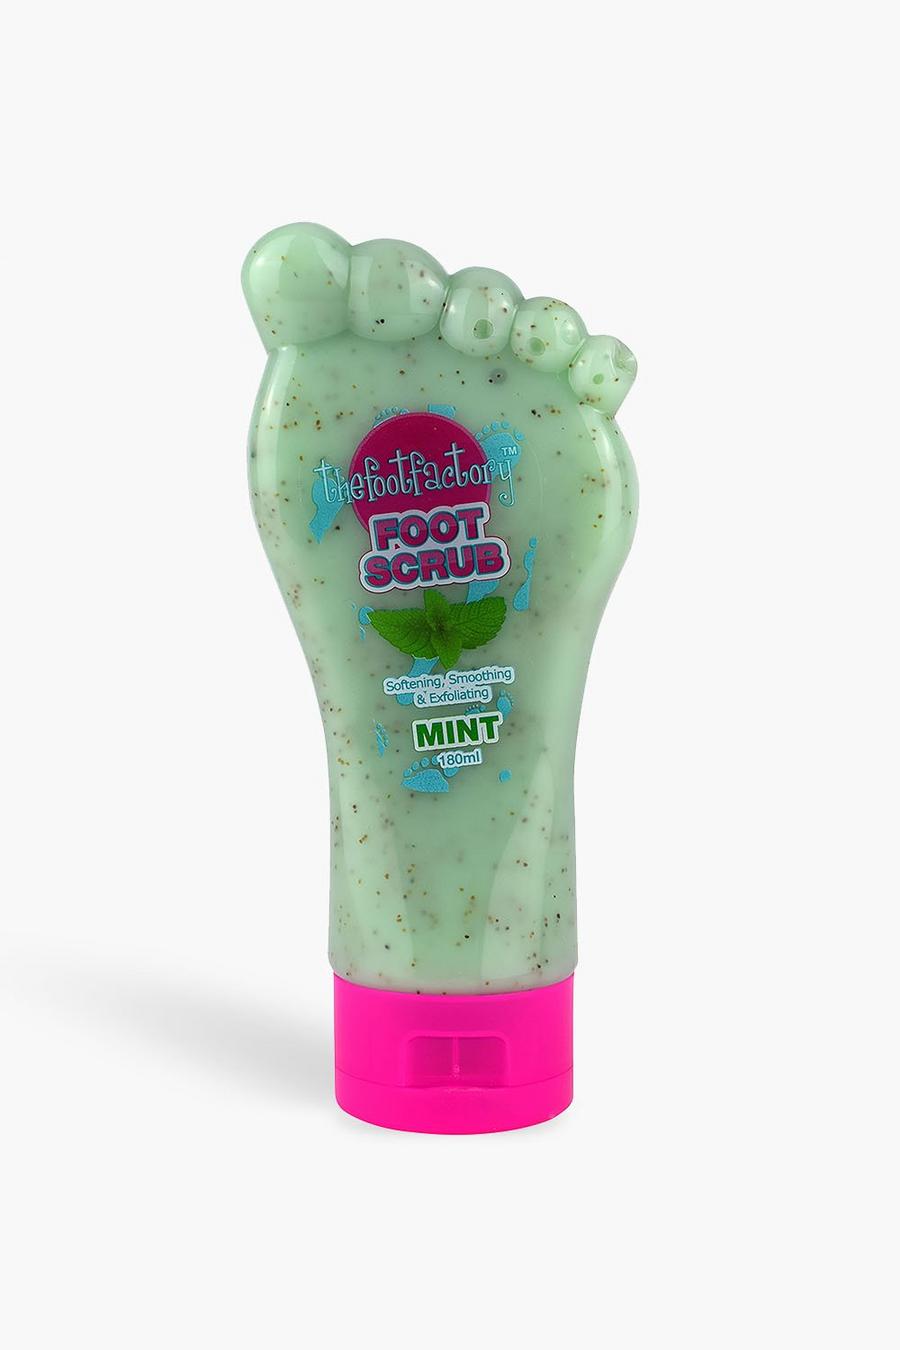 White The Foot Factory Foot Scrub - Peppermint